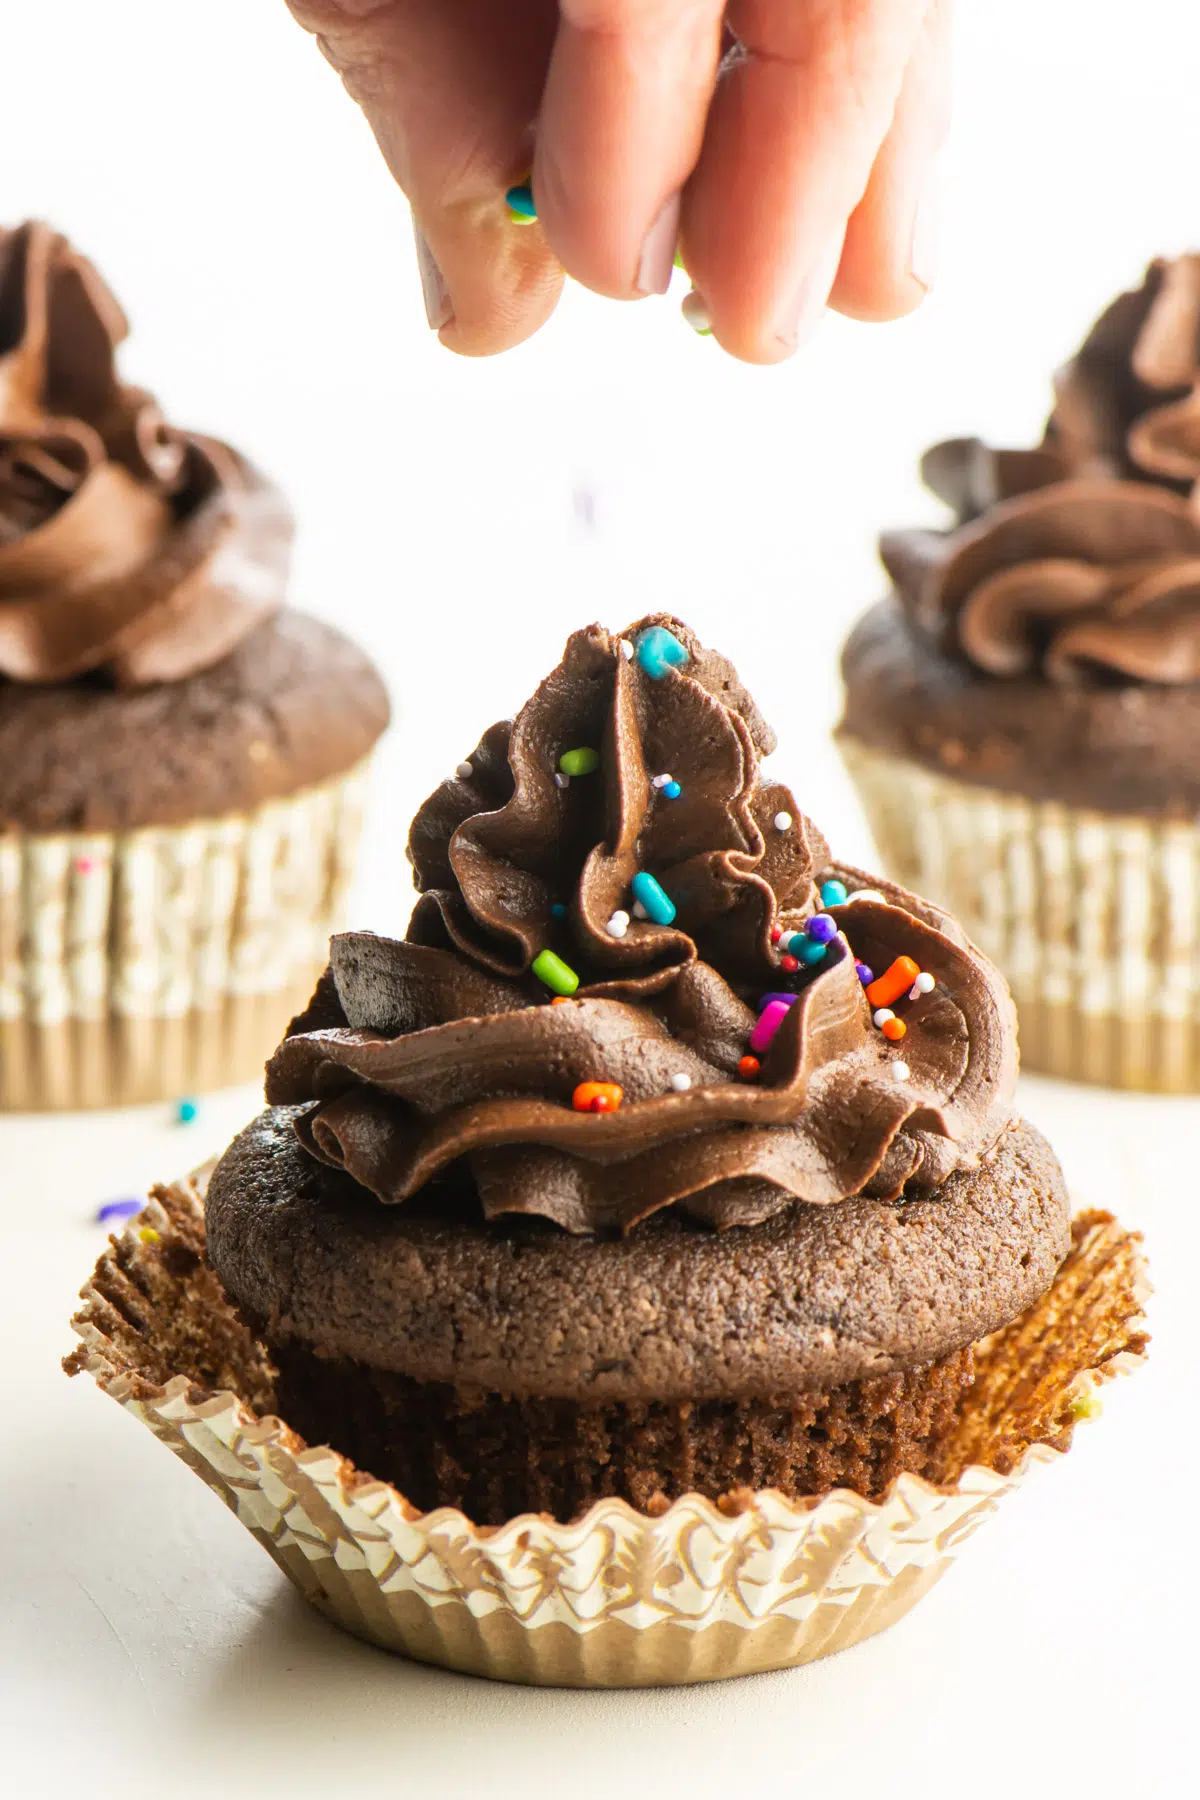 A hand drops sprinkles over a chocolate cupcake.